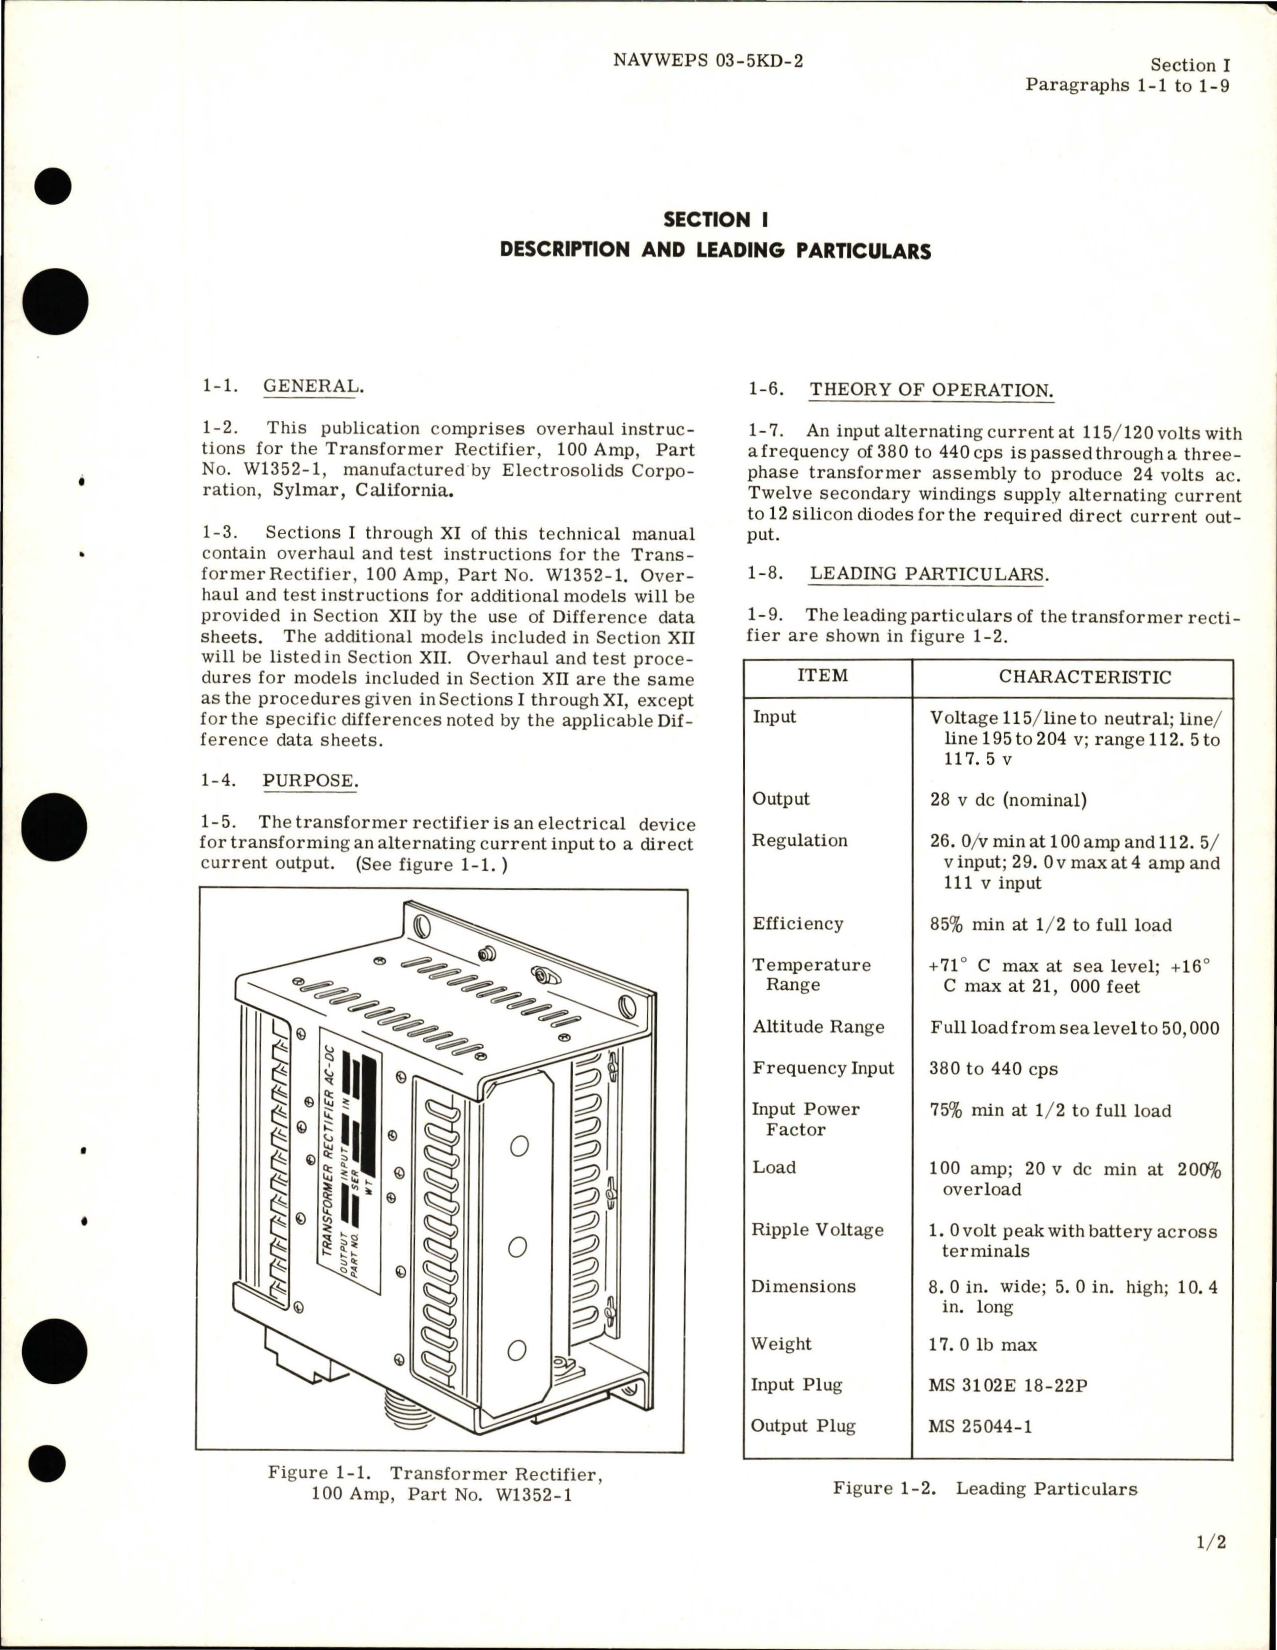 Sample page 7 from AirCorps Library document: Overhaul Instructions for Transformer Rectifier - Part W1352-1